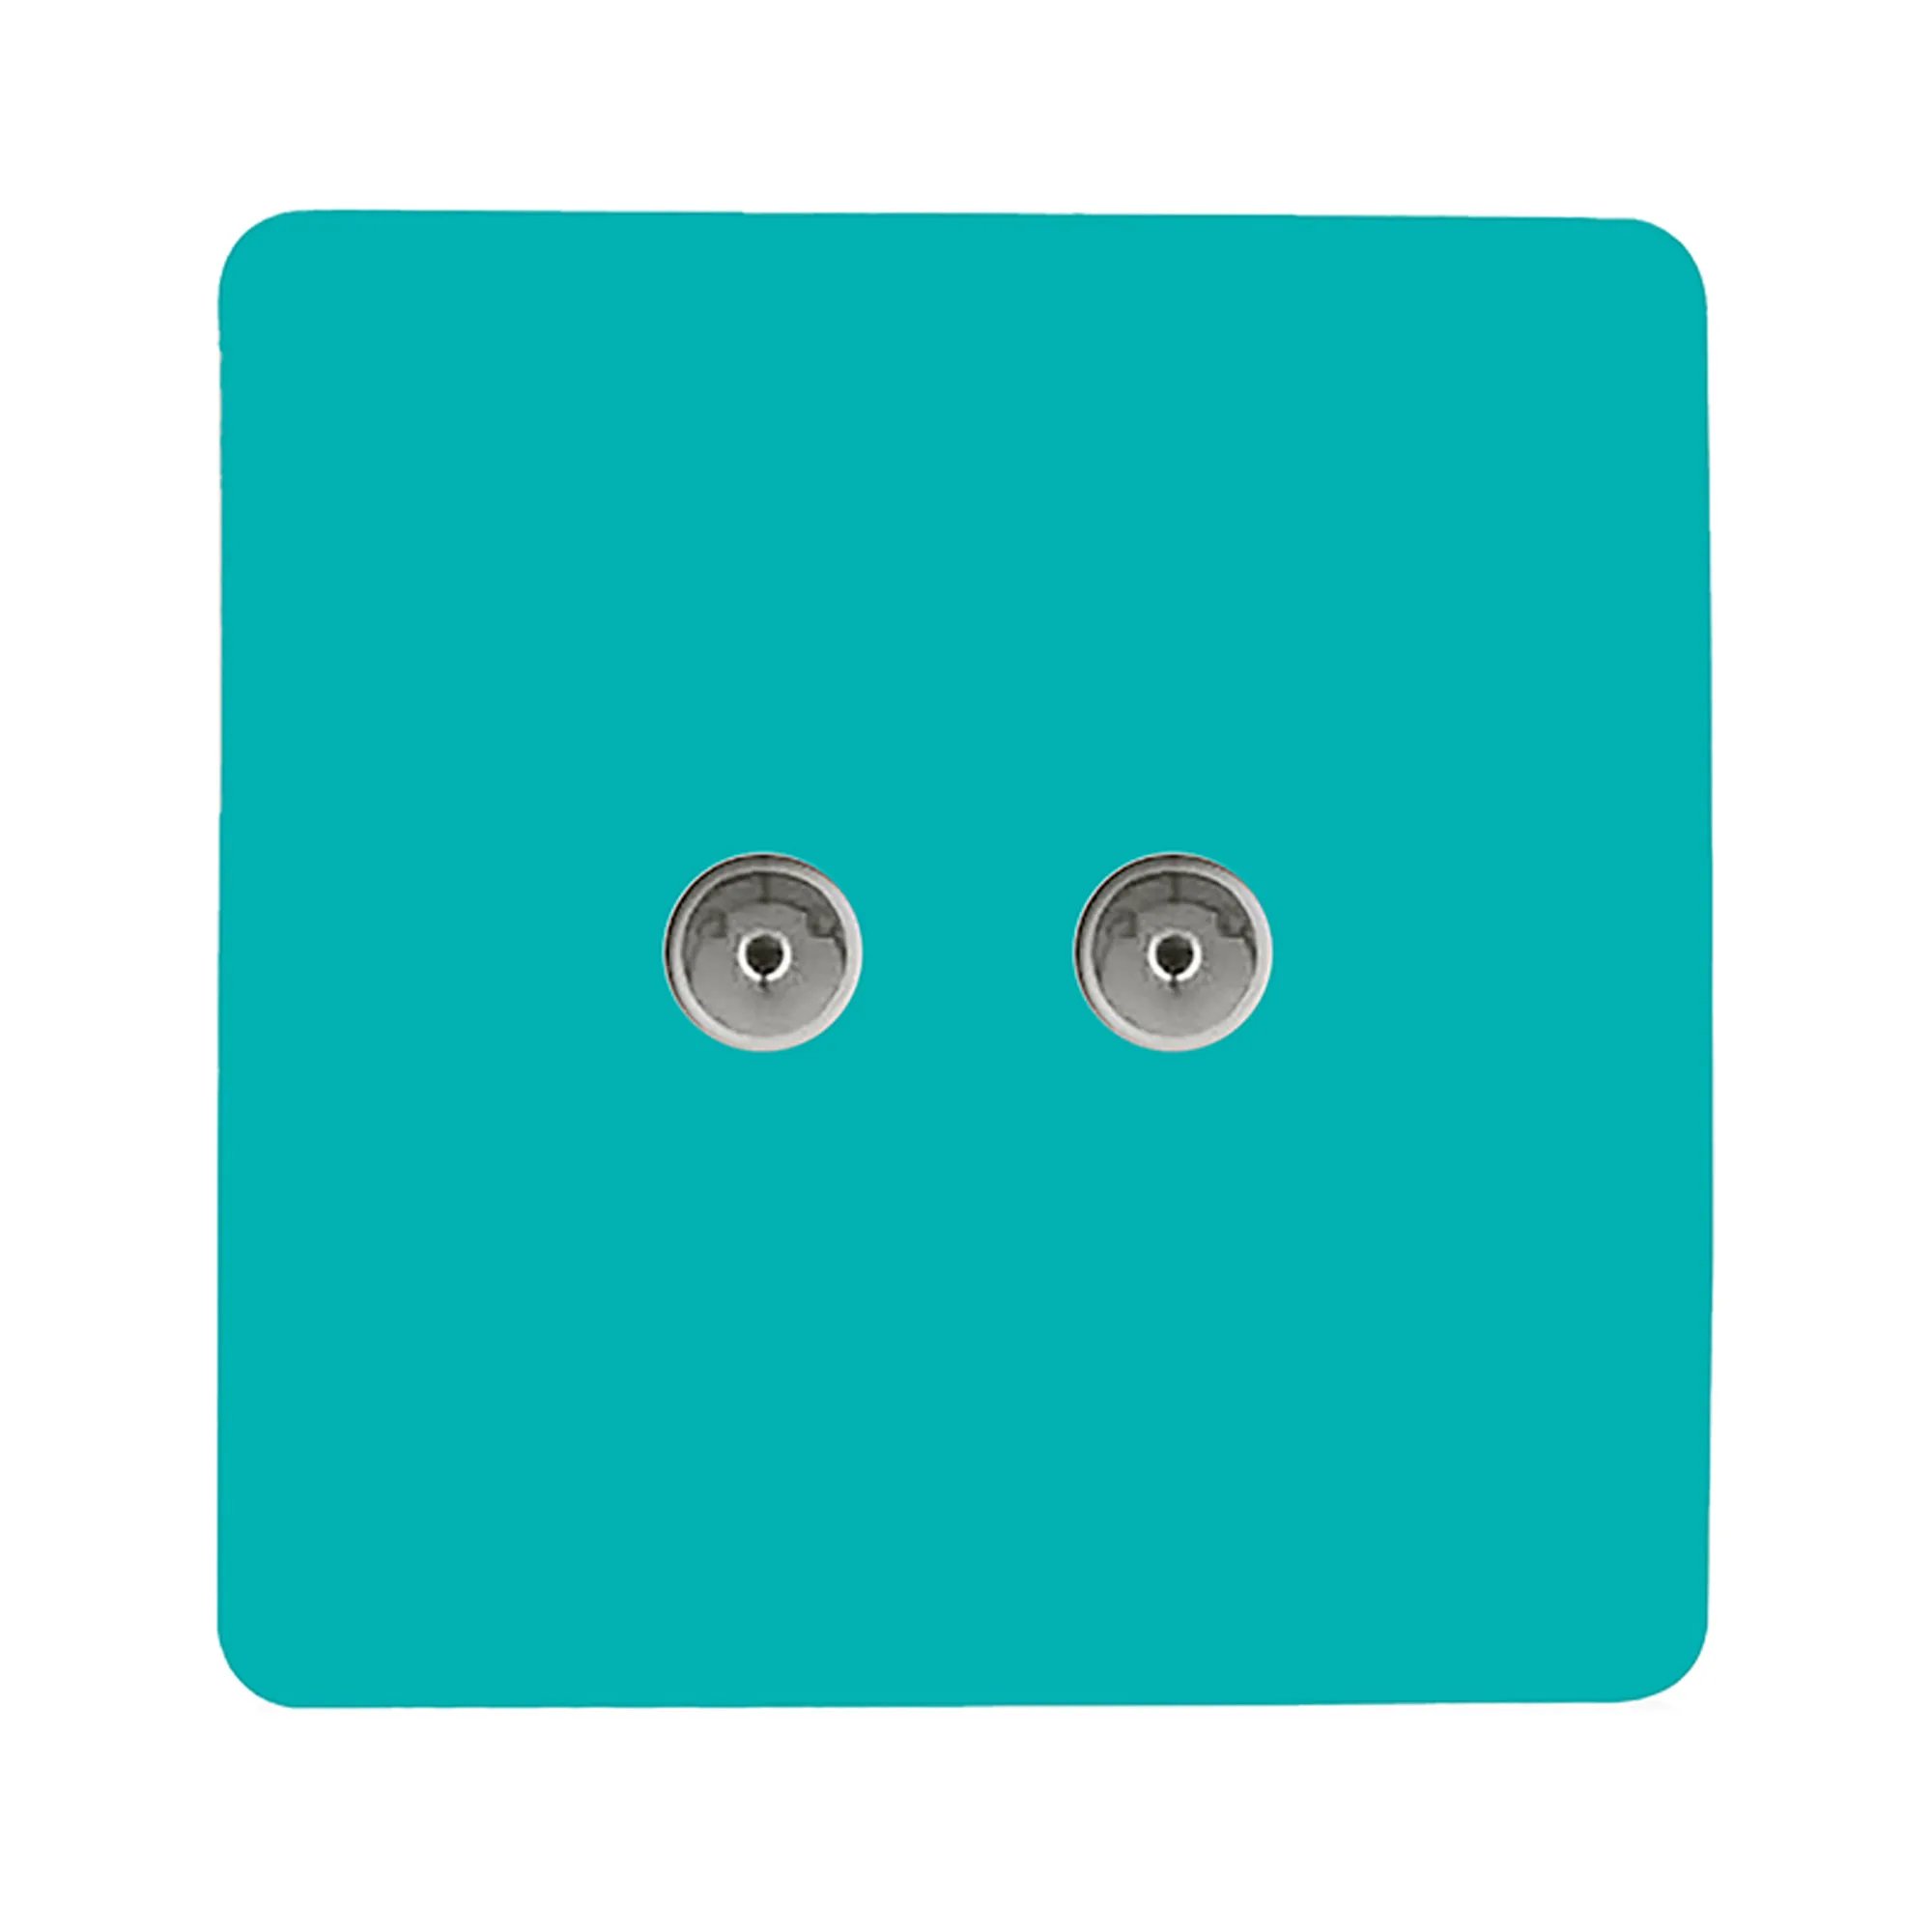 Twin TV Co-Axial Outlet Bright Teal